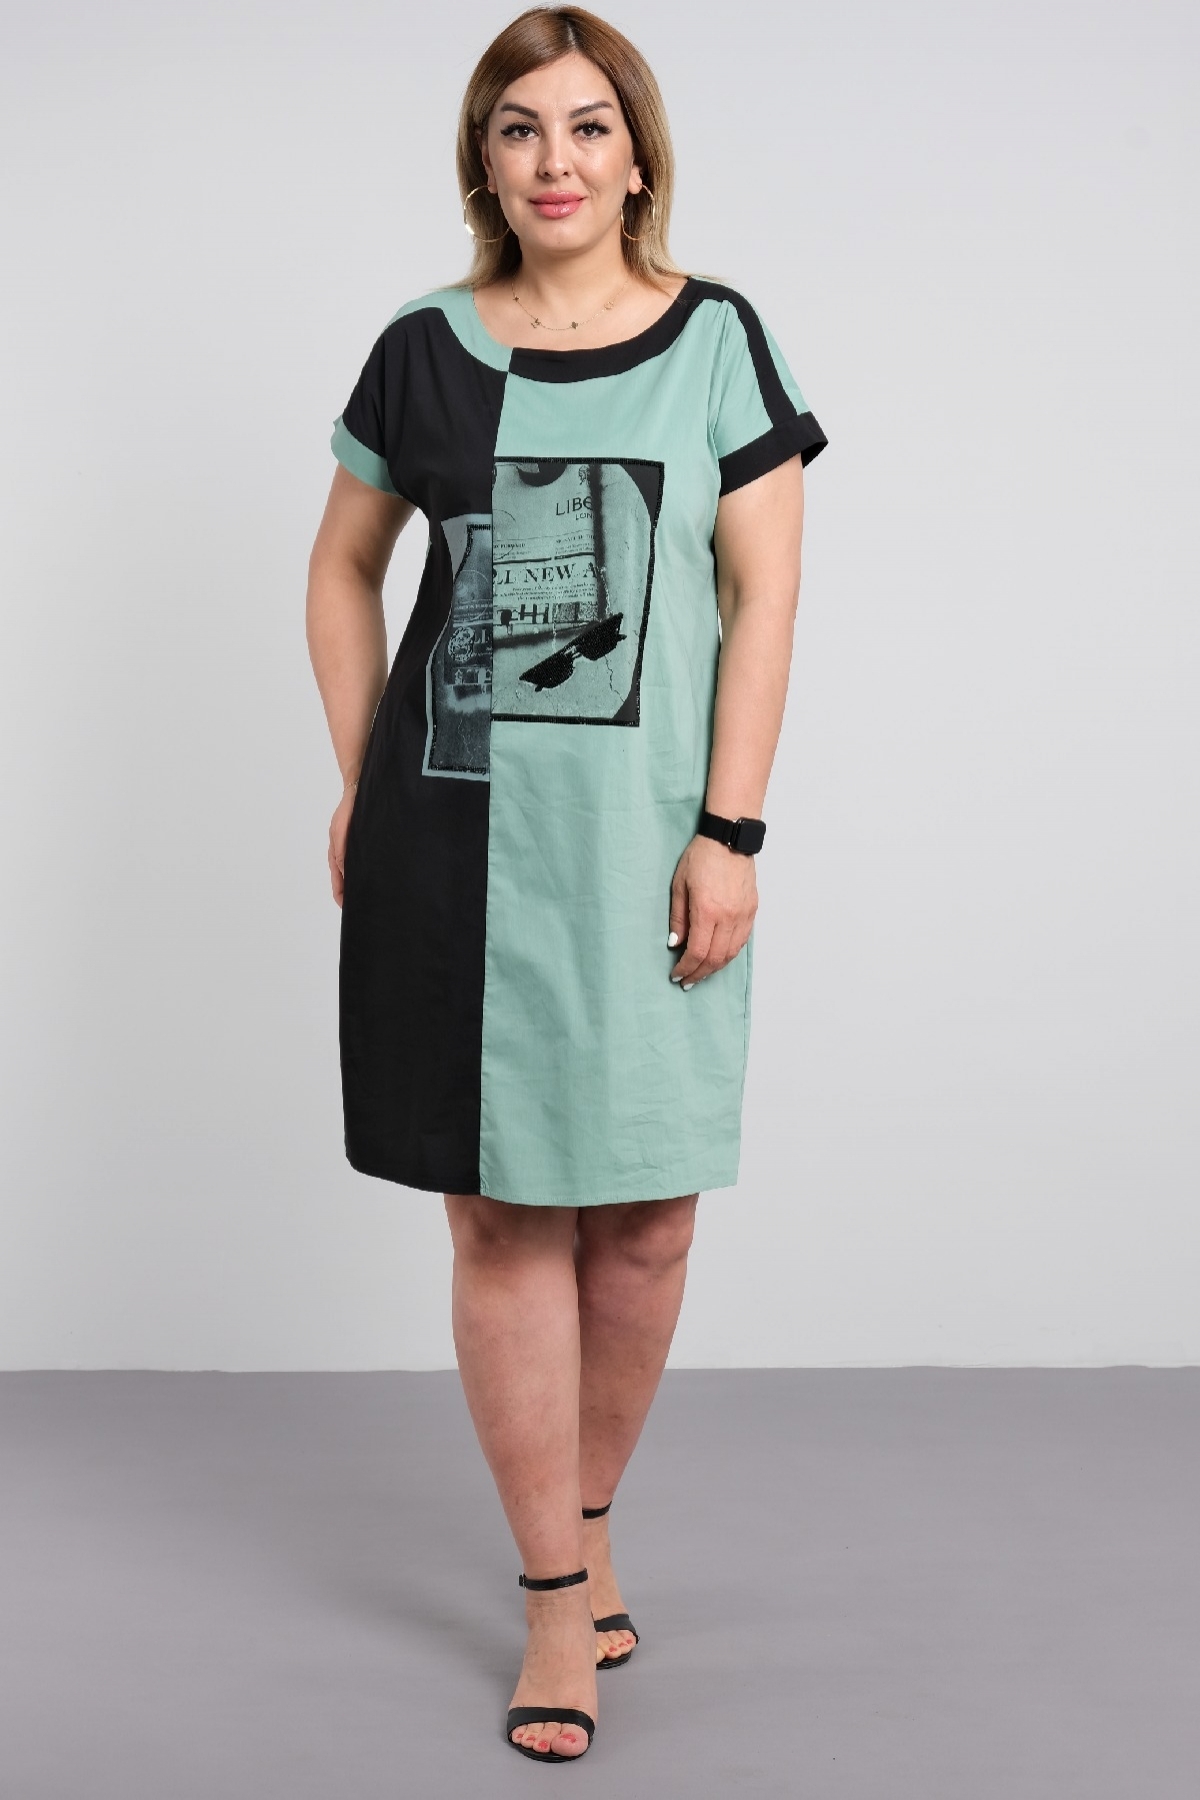 plus size stylish dress short sleeve round neckline designer print above the knee with pockets color transition